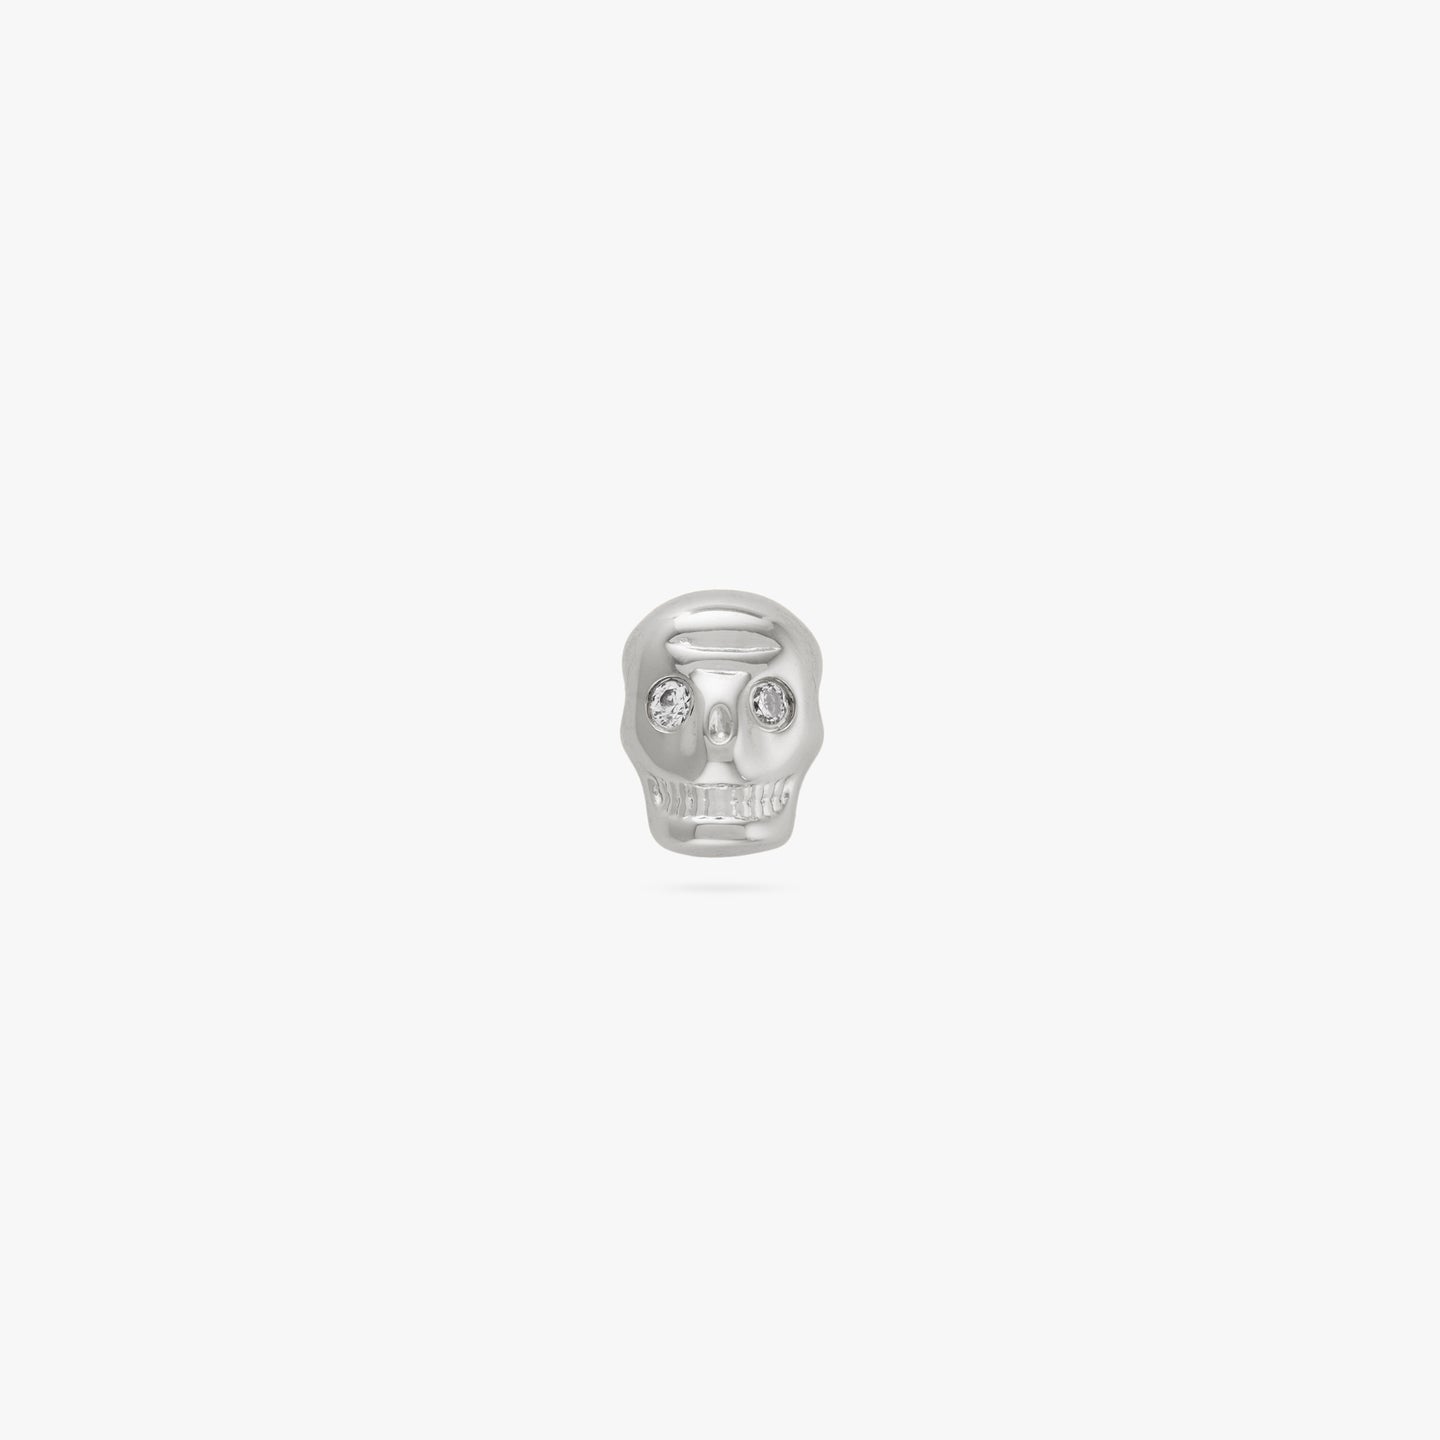 This is a small silver skull stud with cz eyes color:null|silver